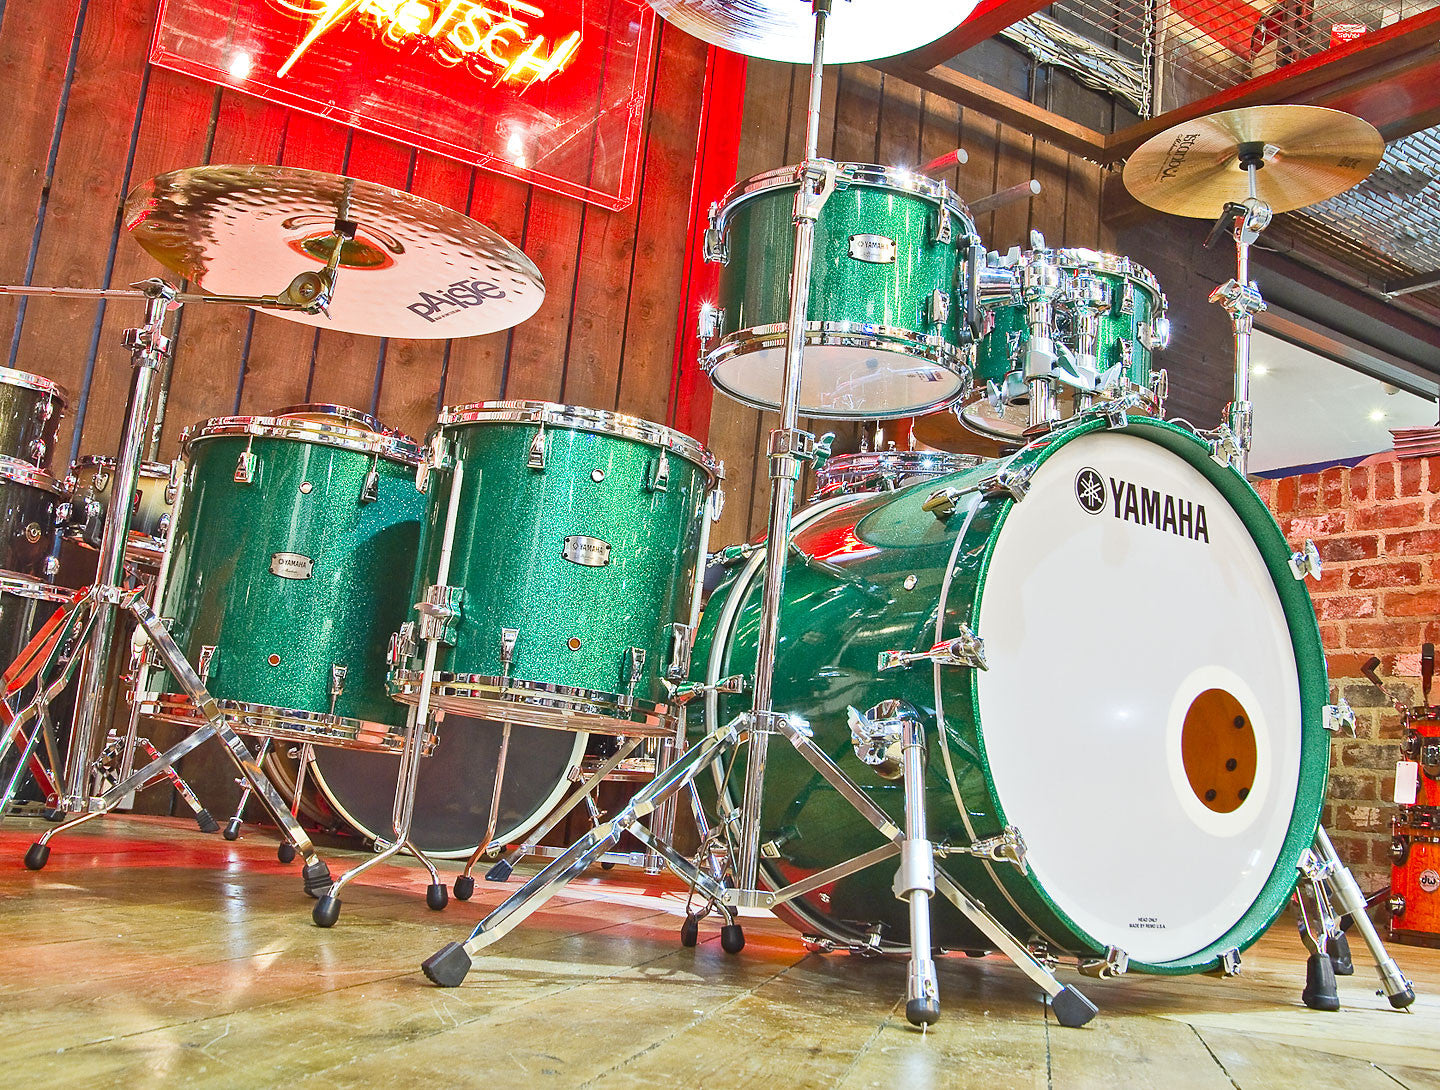 YAMAHA ABSOLUTE MAPLE HYBRID 5-PIECE SHELL PACK IN JADE GREEN SPARKLE